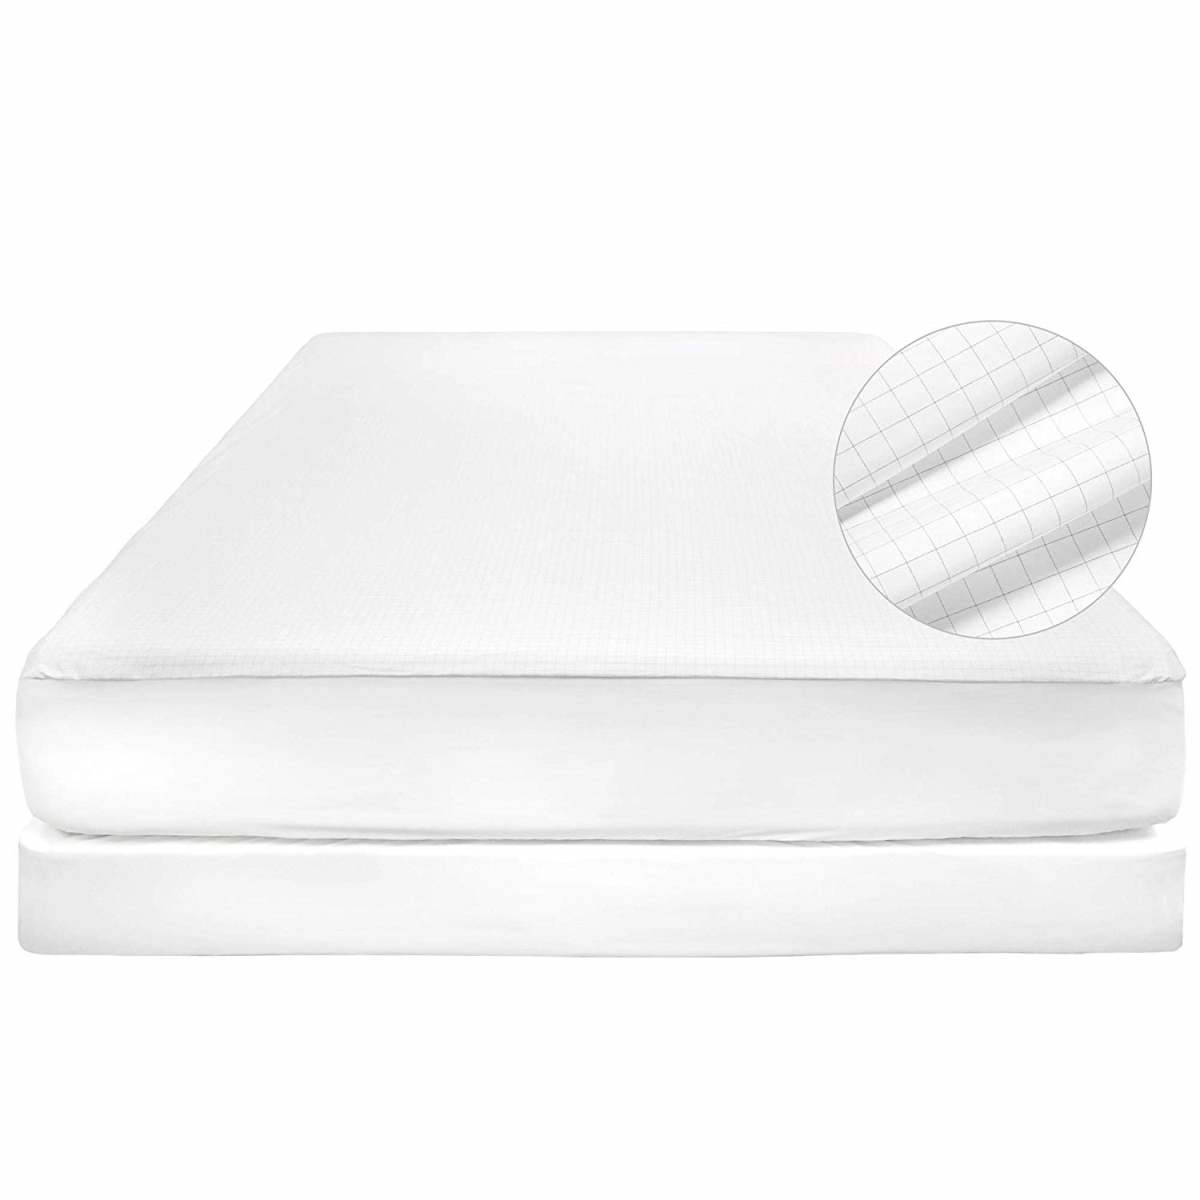 733396 Sleep Solutions By Carbon-infused Waterproof Mattress Protector, White - Queen Size